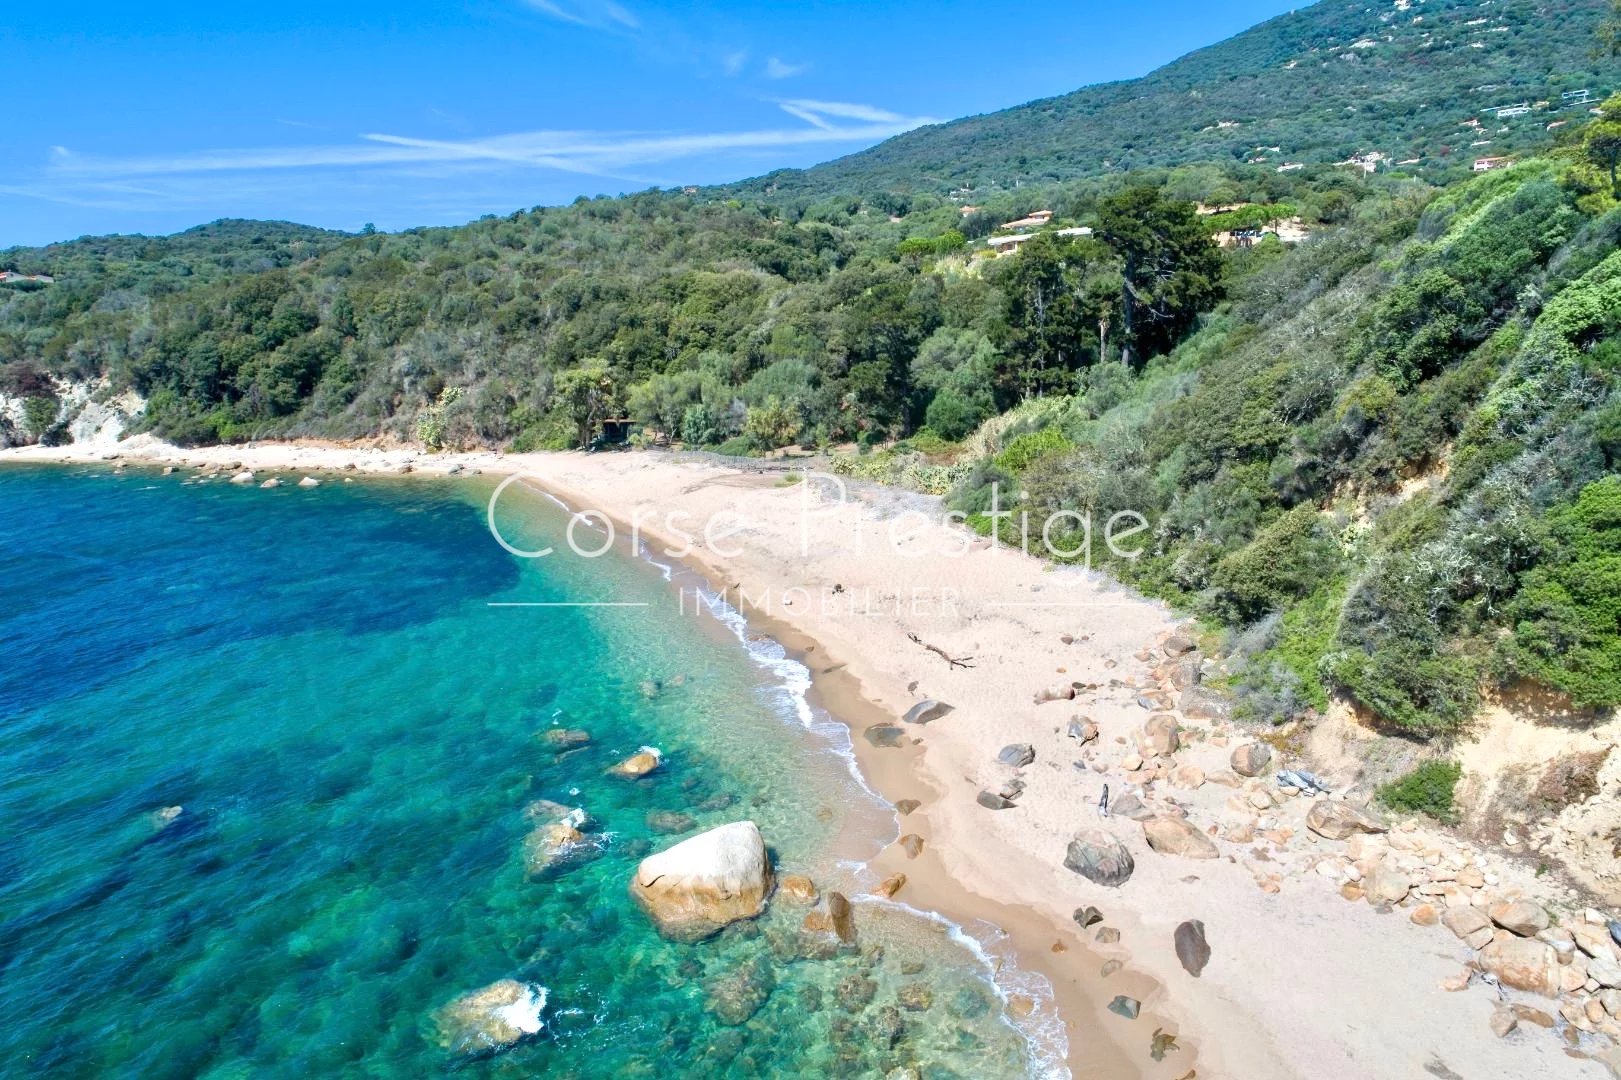 waterfront luxury villa for rent in corsica - propriano image3